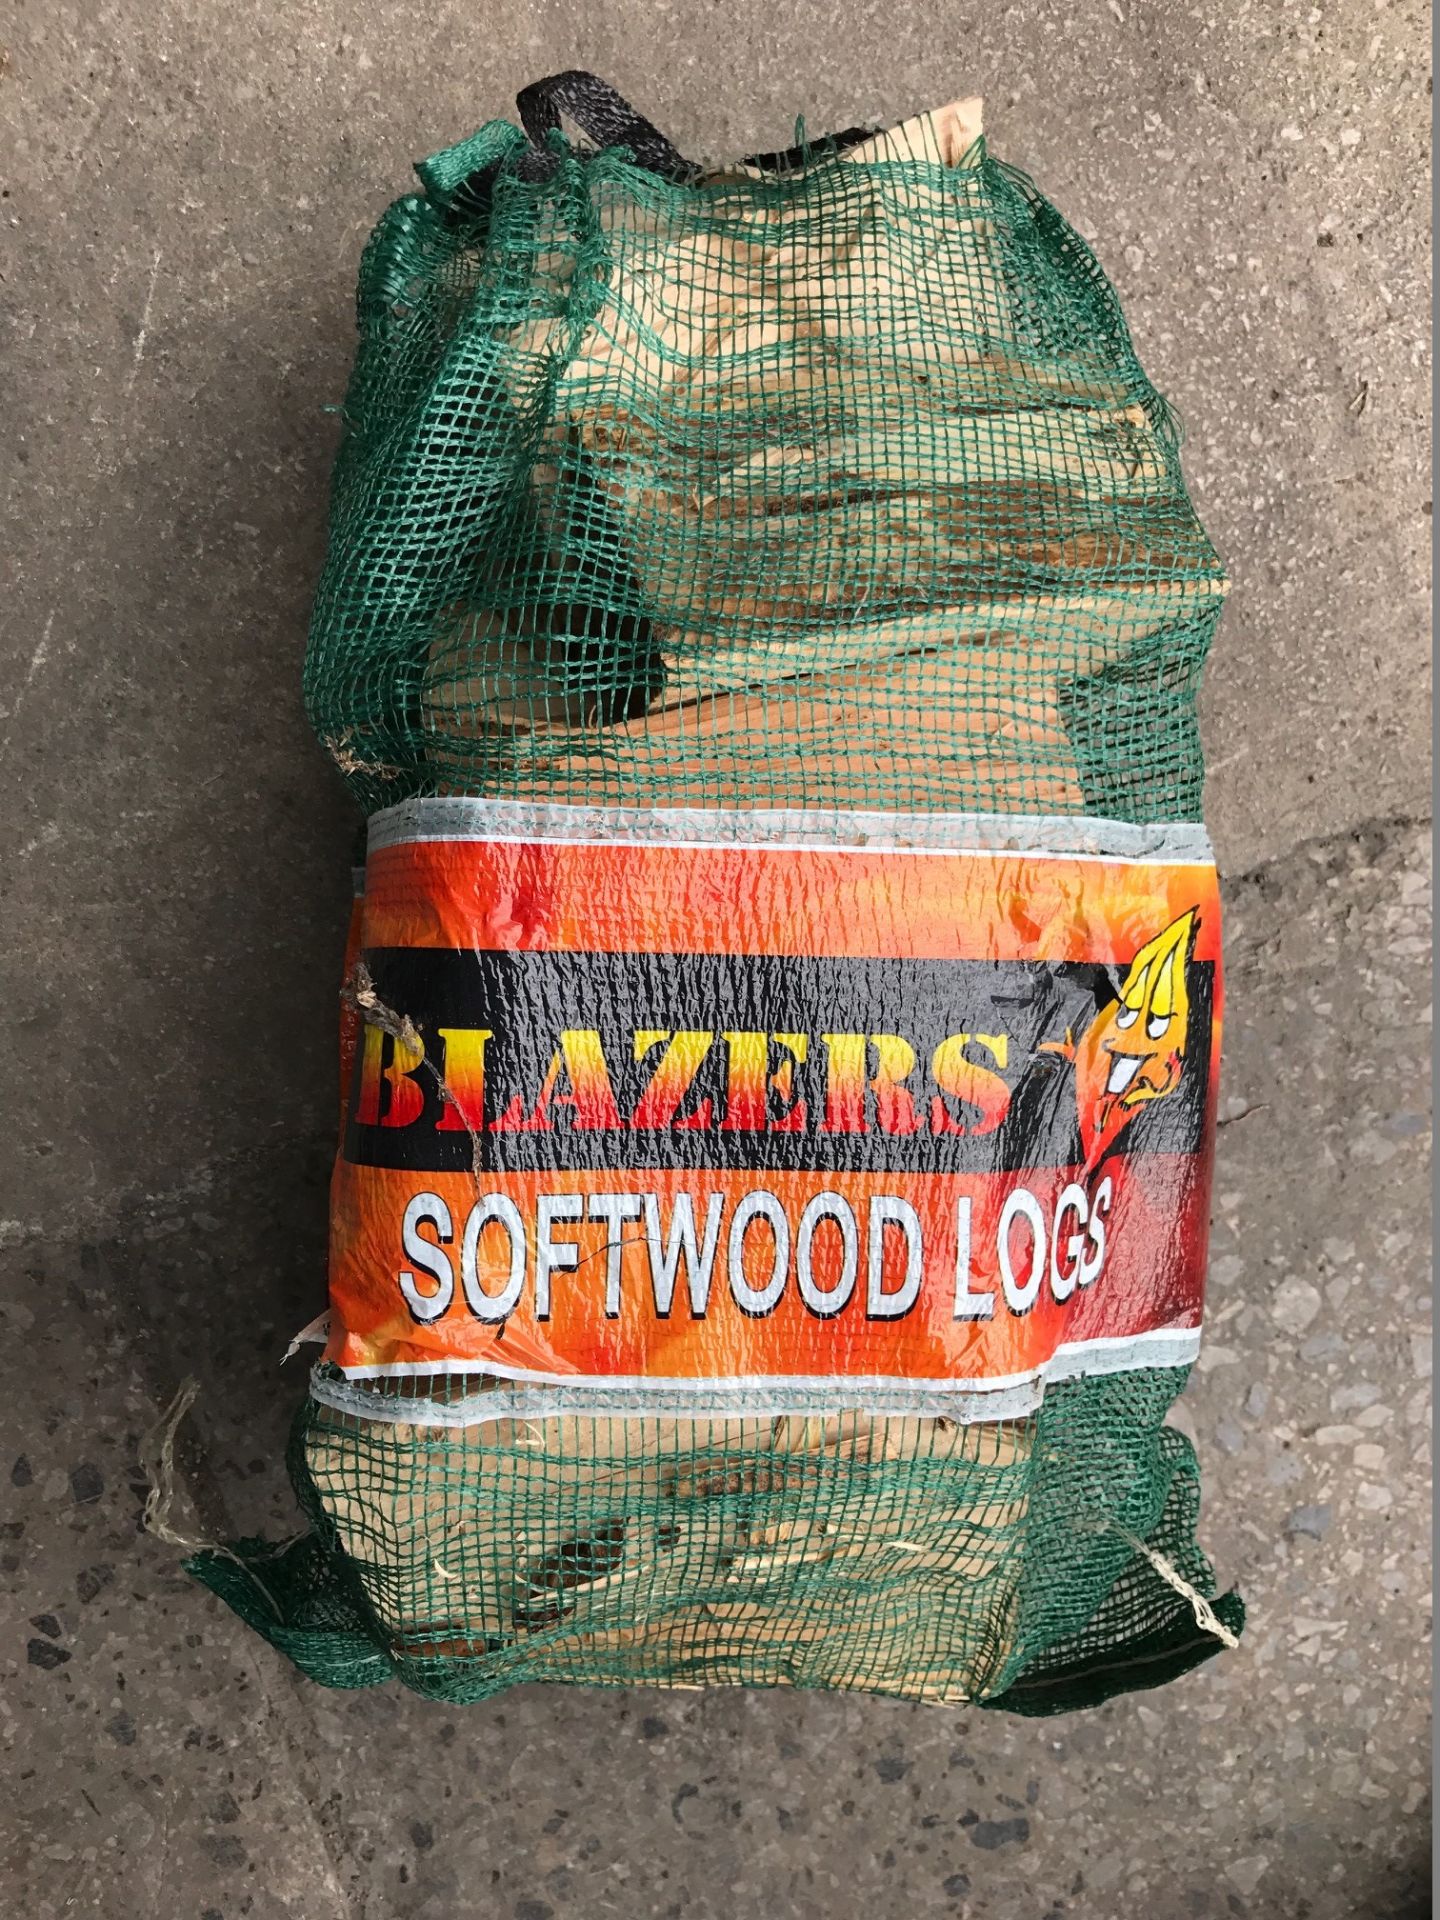 2 x Bags of Softwood Logs